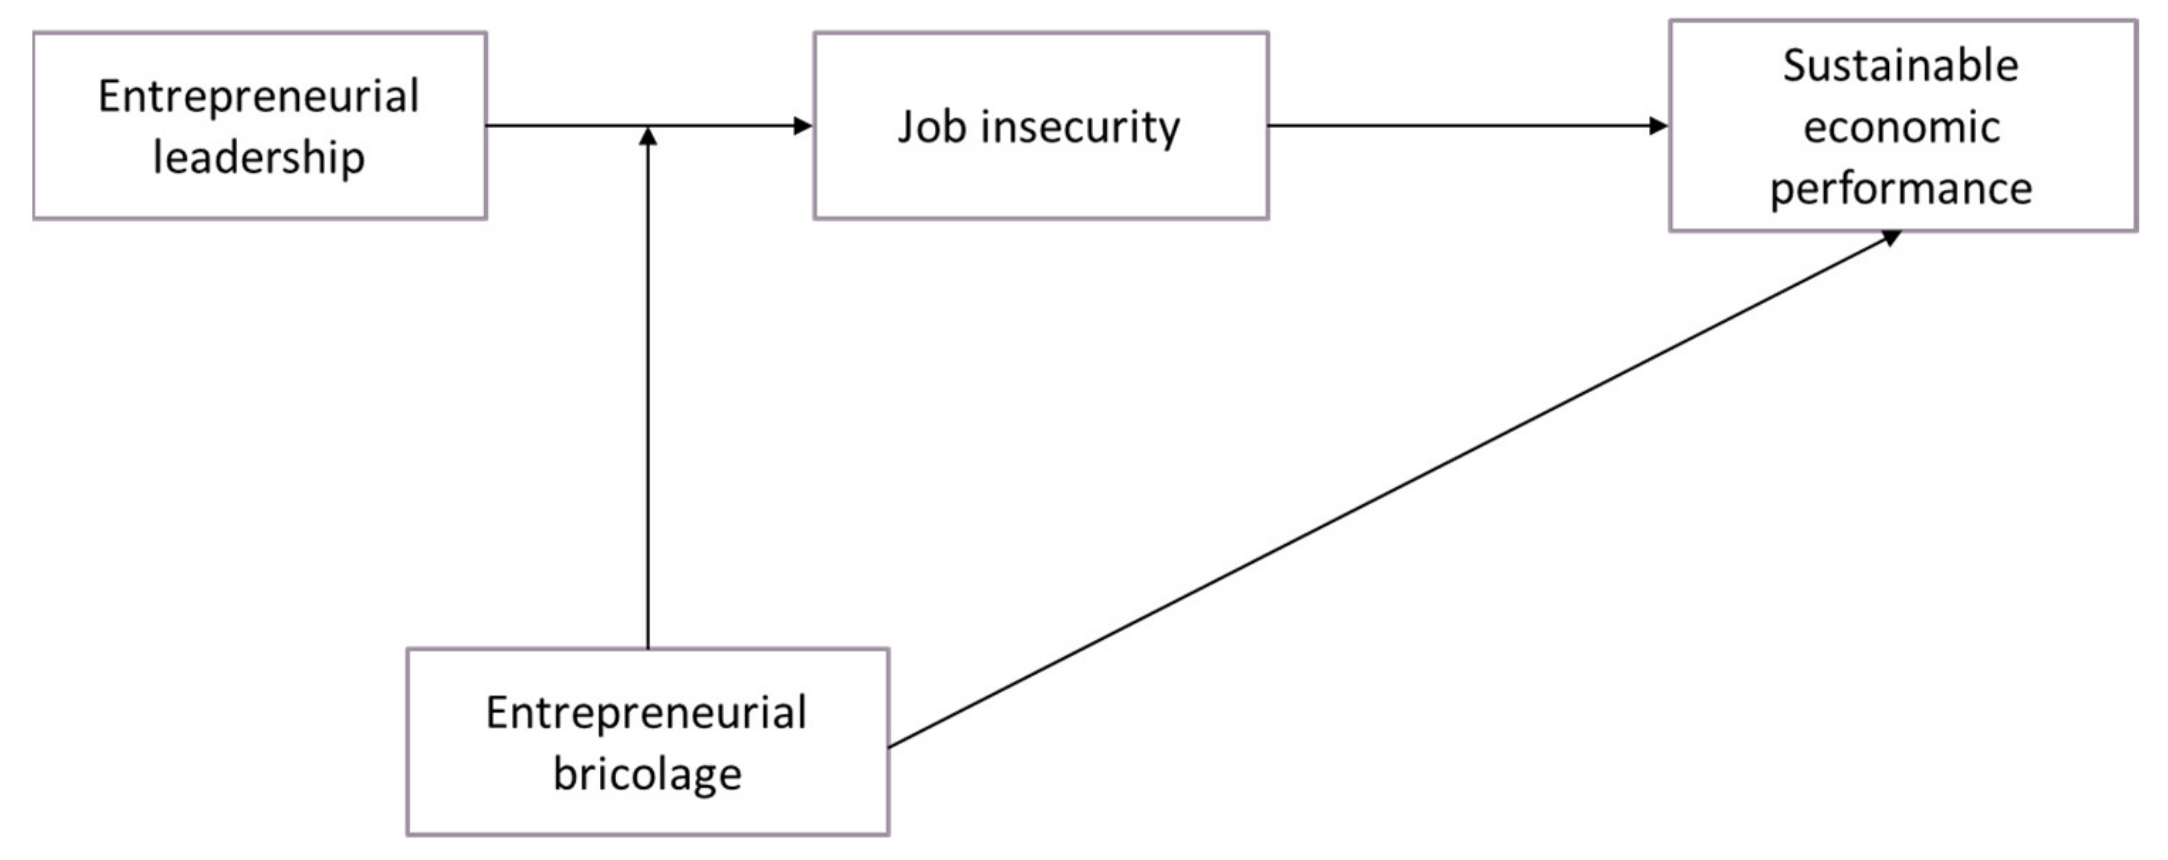 Sustainability | Free Full-Text | Impact of Entrepreneurial Leadership and  Bricolage on Job Security and Sustainable Economic Performance: An  Empirical Study of Croatian Companies during COVID-19 Pandemic